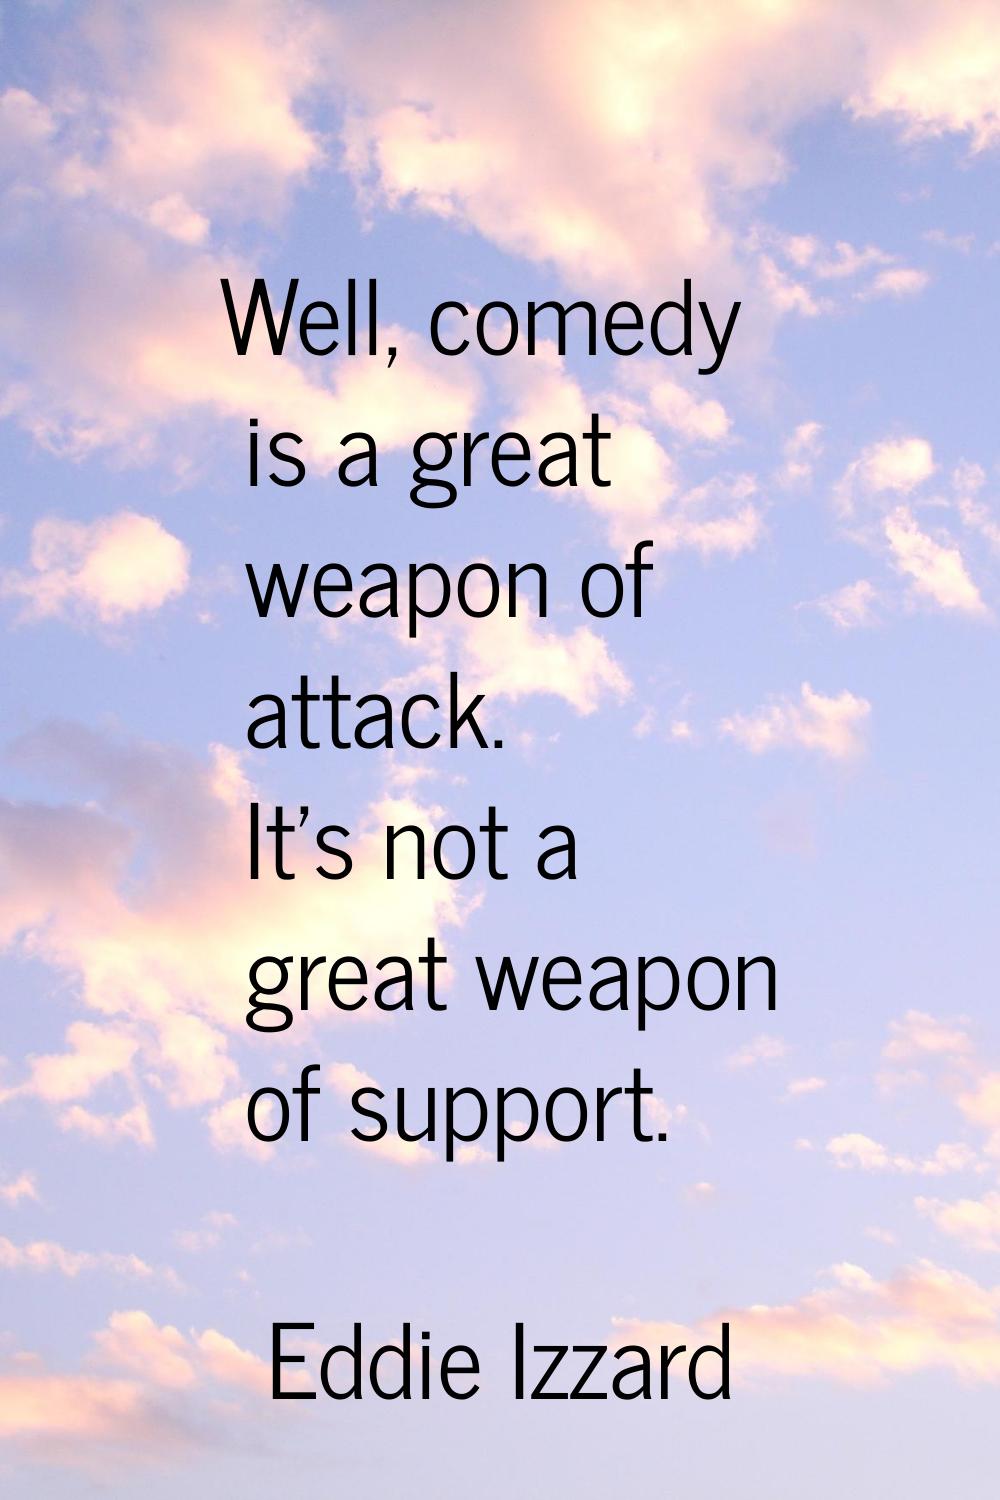 Well, comedy is a great weapon of attack. It's not a great weapon of support.